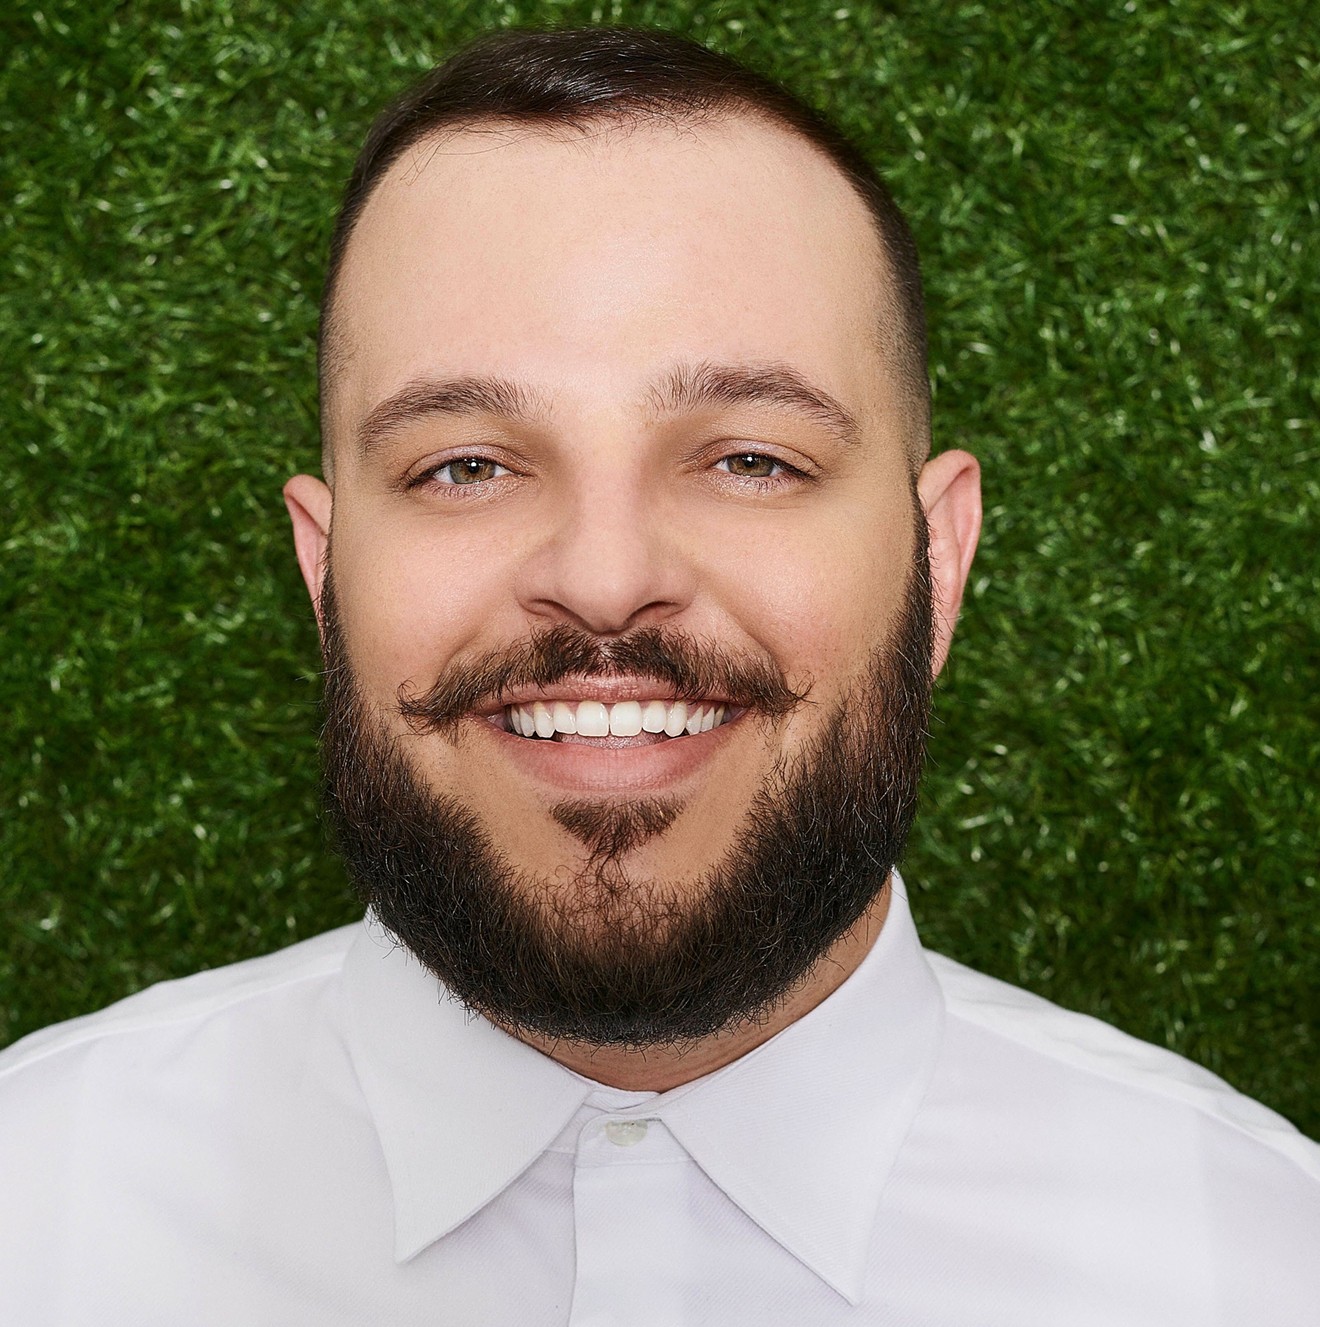 Comedian Daniel Franzese is best known for his role as Daniel in Mean Girls.